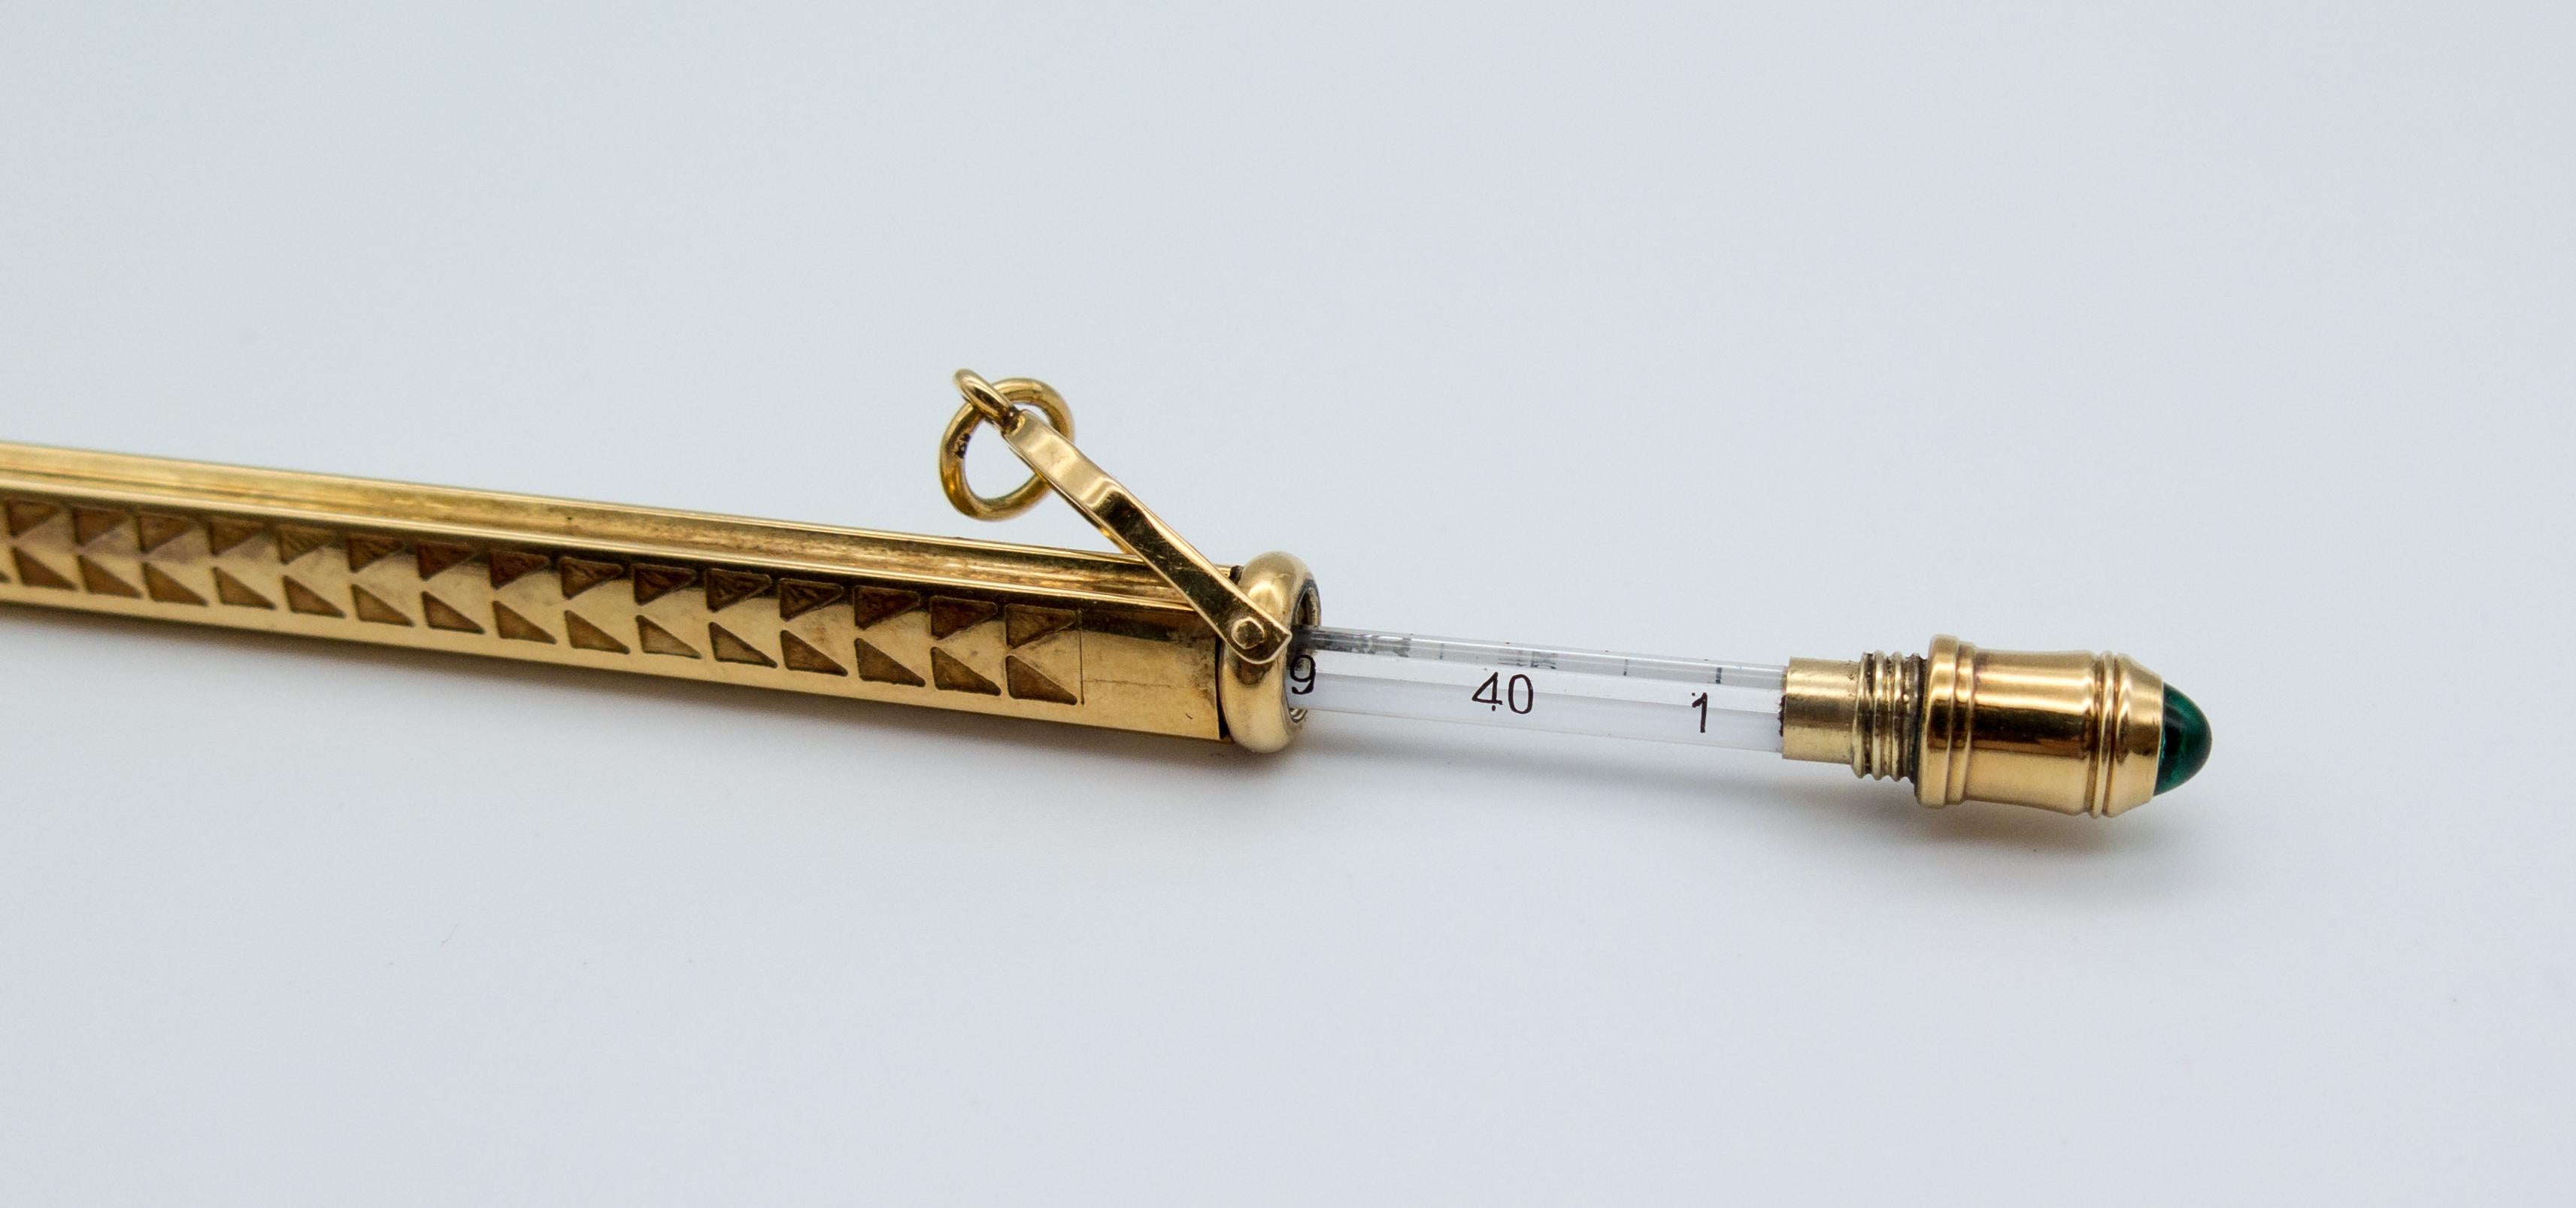 A practical object that's also beautiful, this 14 karat gold thermometer (numbers in Celsius, not Fahrenheit)  measures 5 inches in length, including the gold circle at the top.  It unscrews to reveal the thermometer inside.  Please note that within